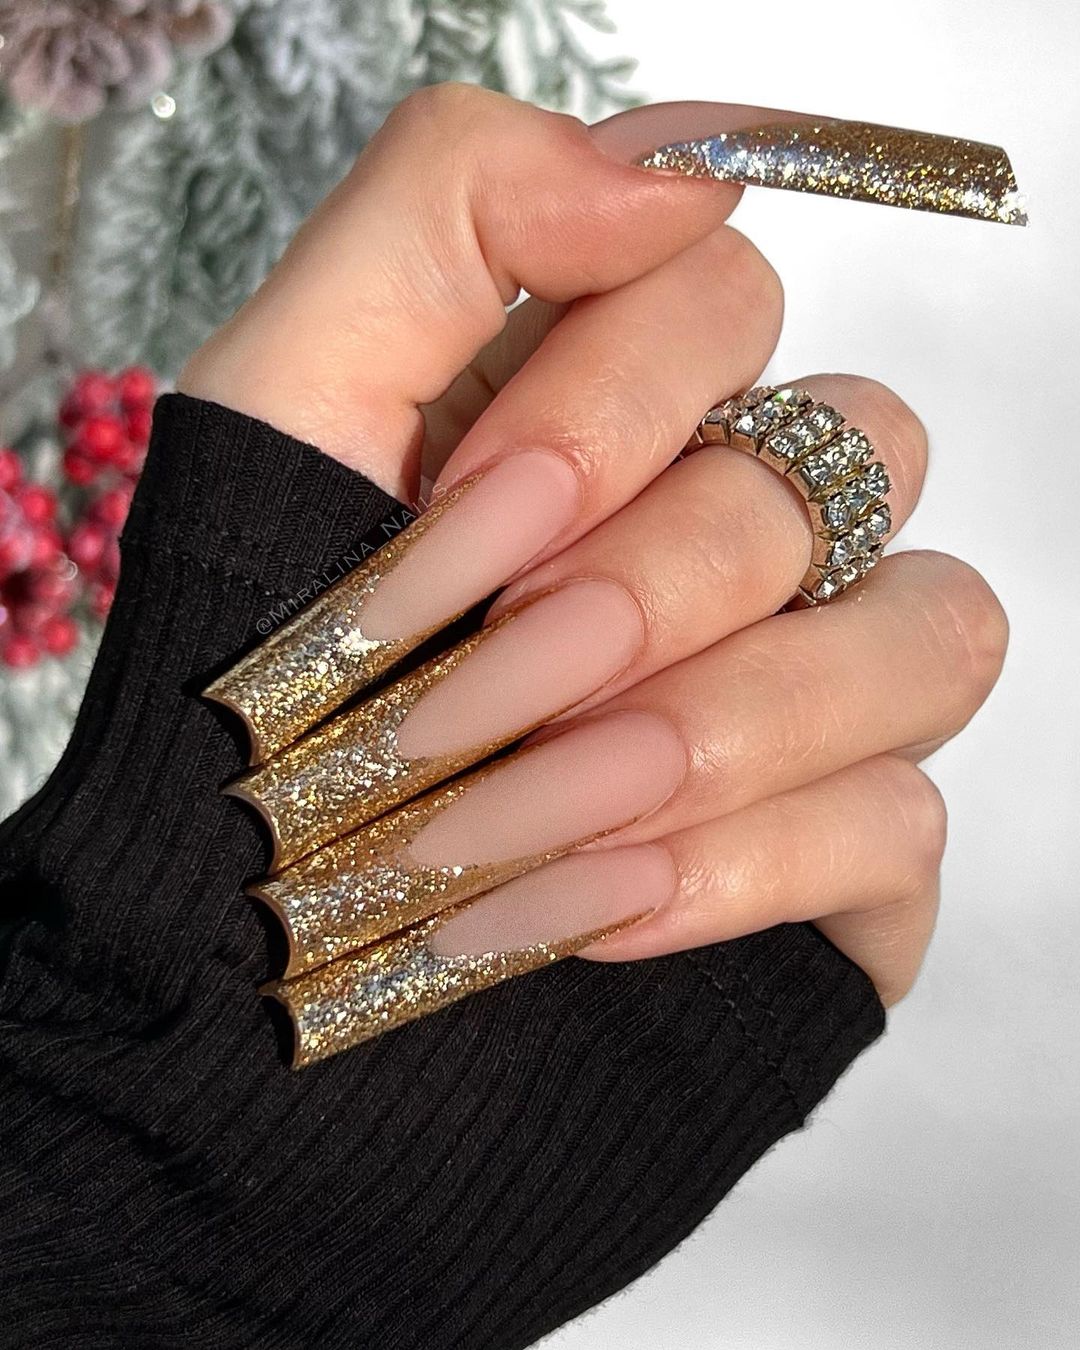 Long Square Acrylic Nails with Gold Glitter Tips